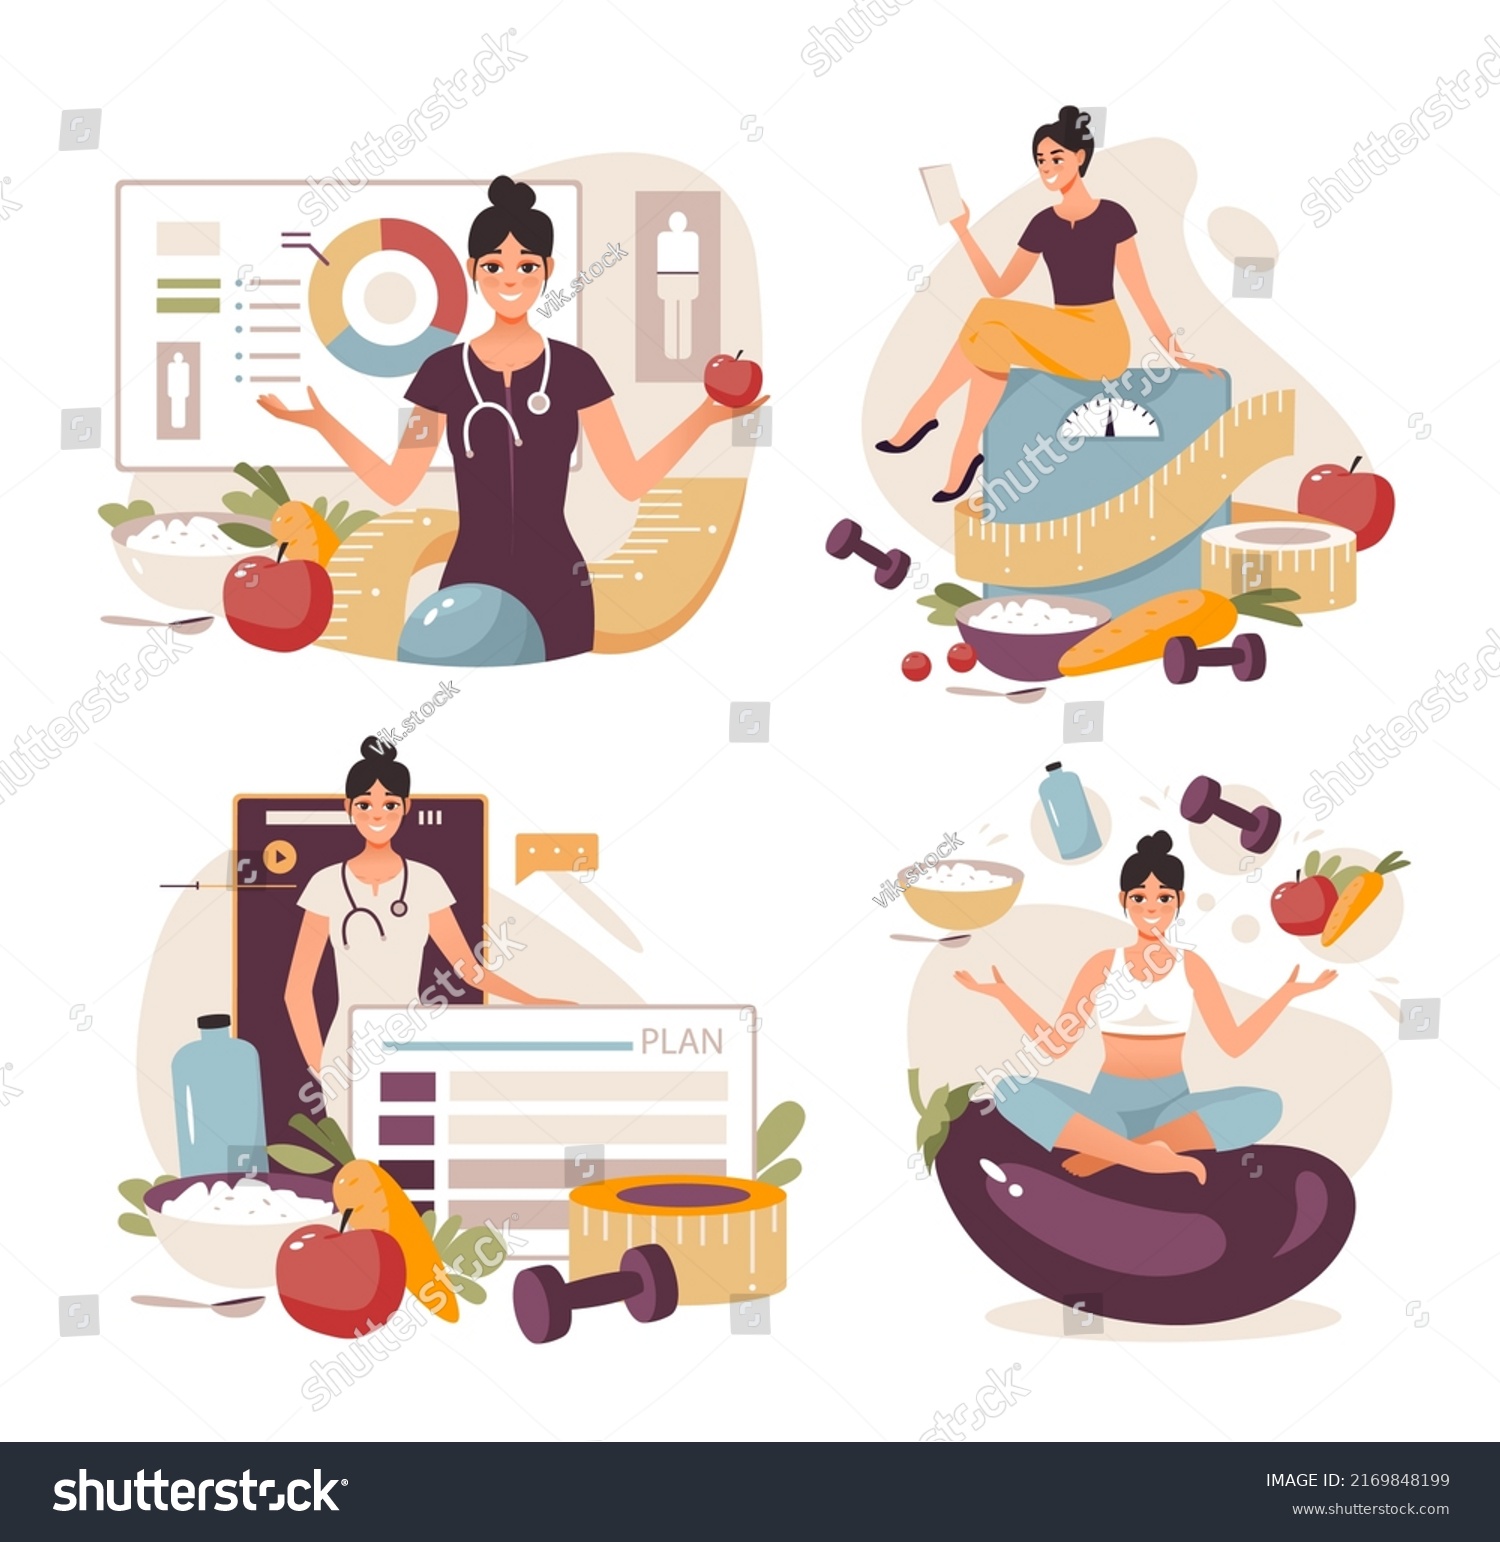 Nutritionist concept. Weight loss program and diet plan. Diet therapy with healthy food and physical activity. Flat vector illustration
 #2169848199